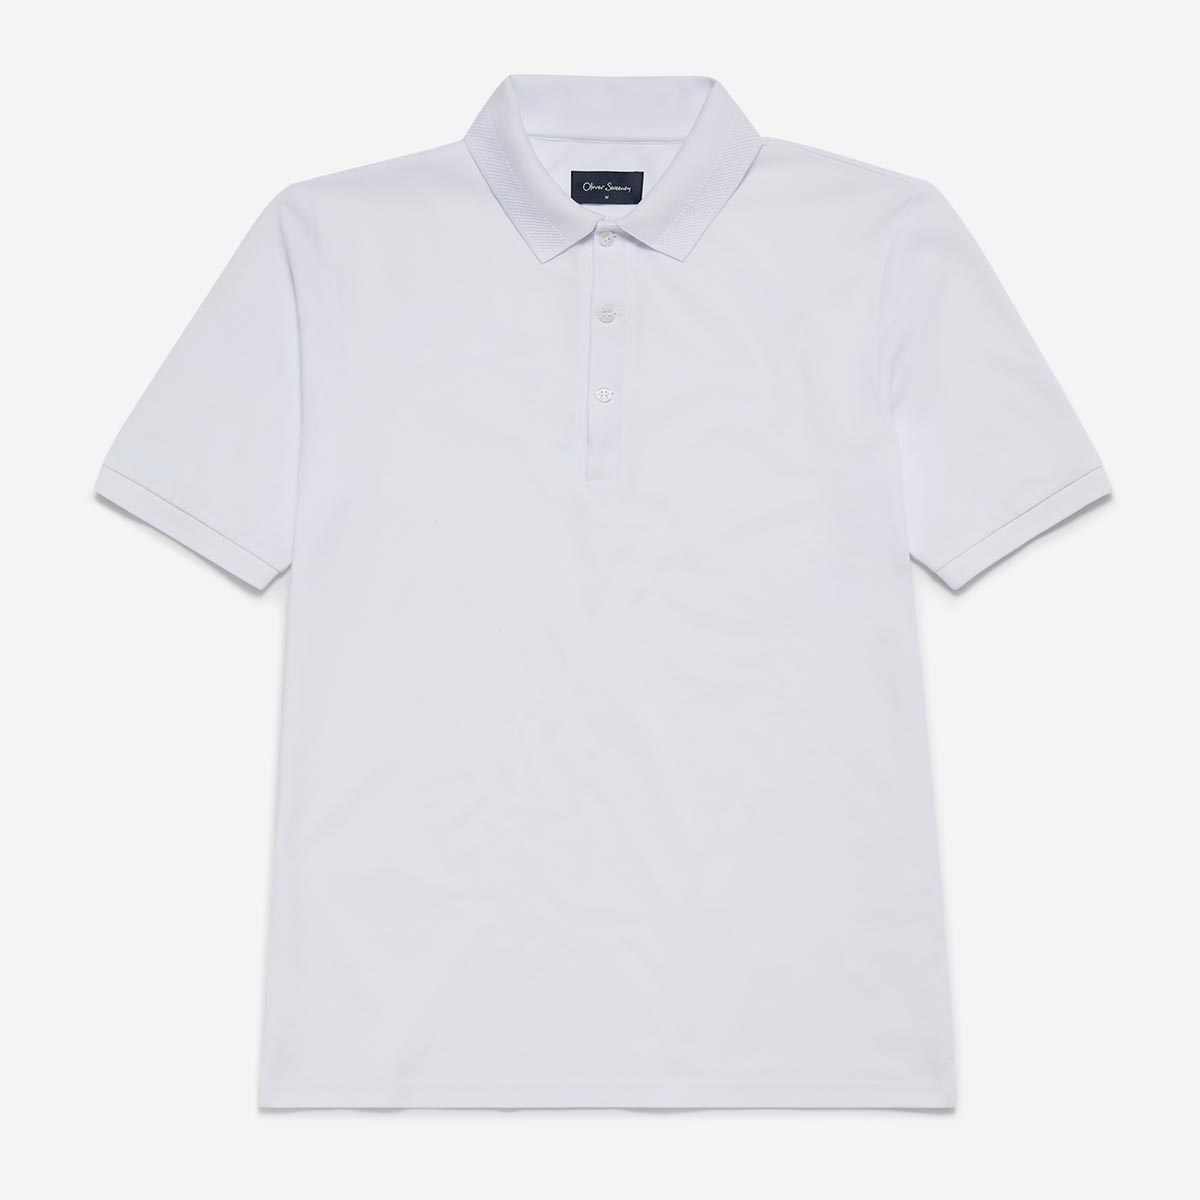 Tralee White Polo T-Shirt | Men's T-Shirts | Oliver Sweeney